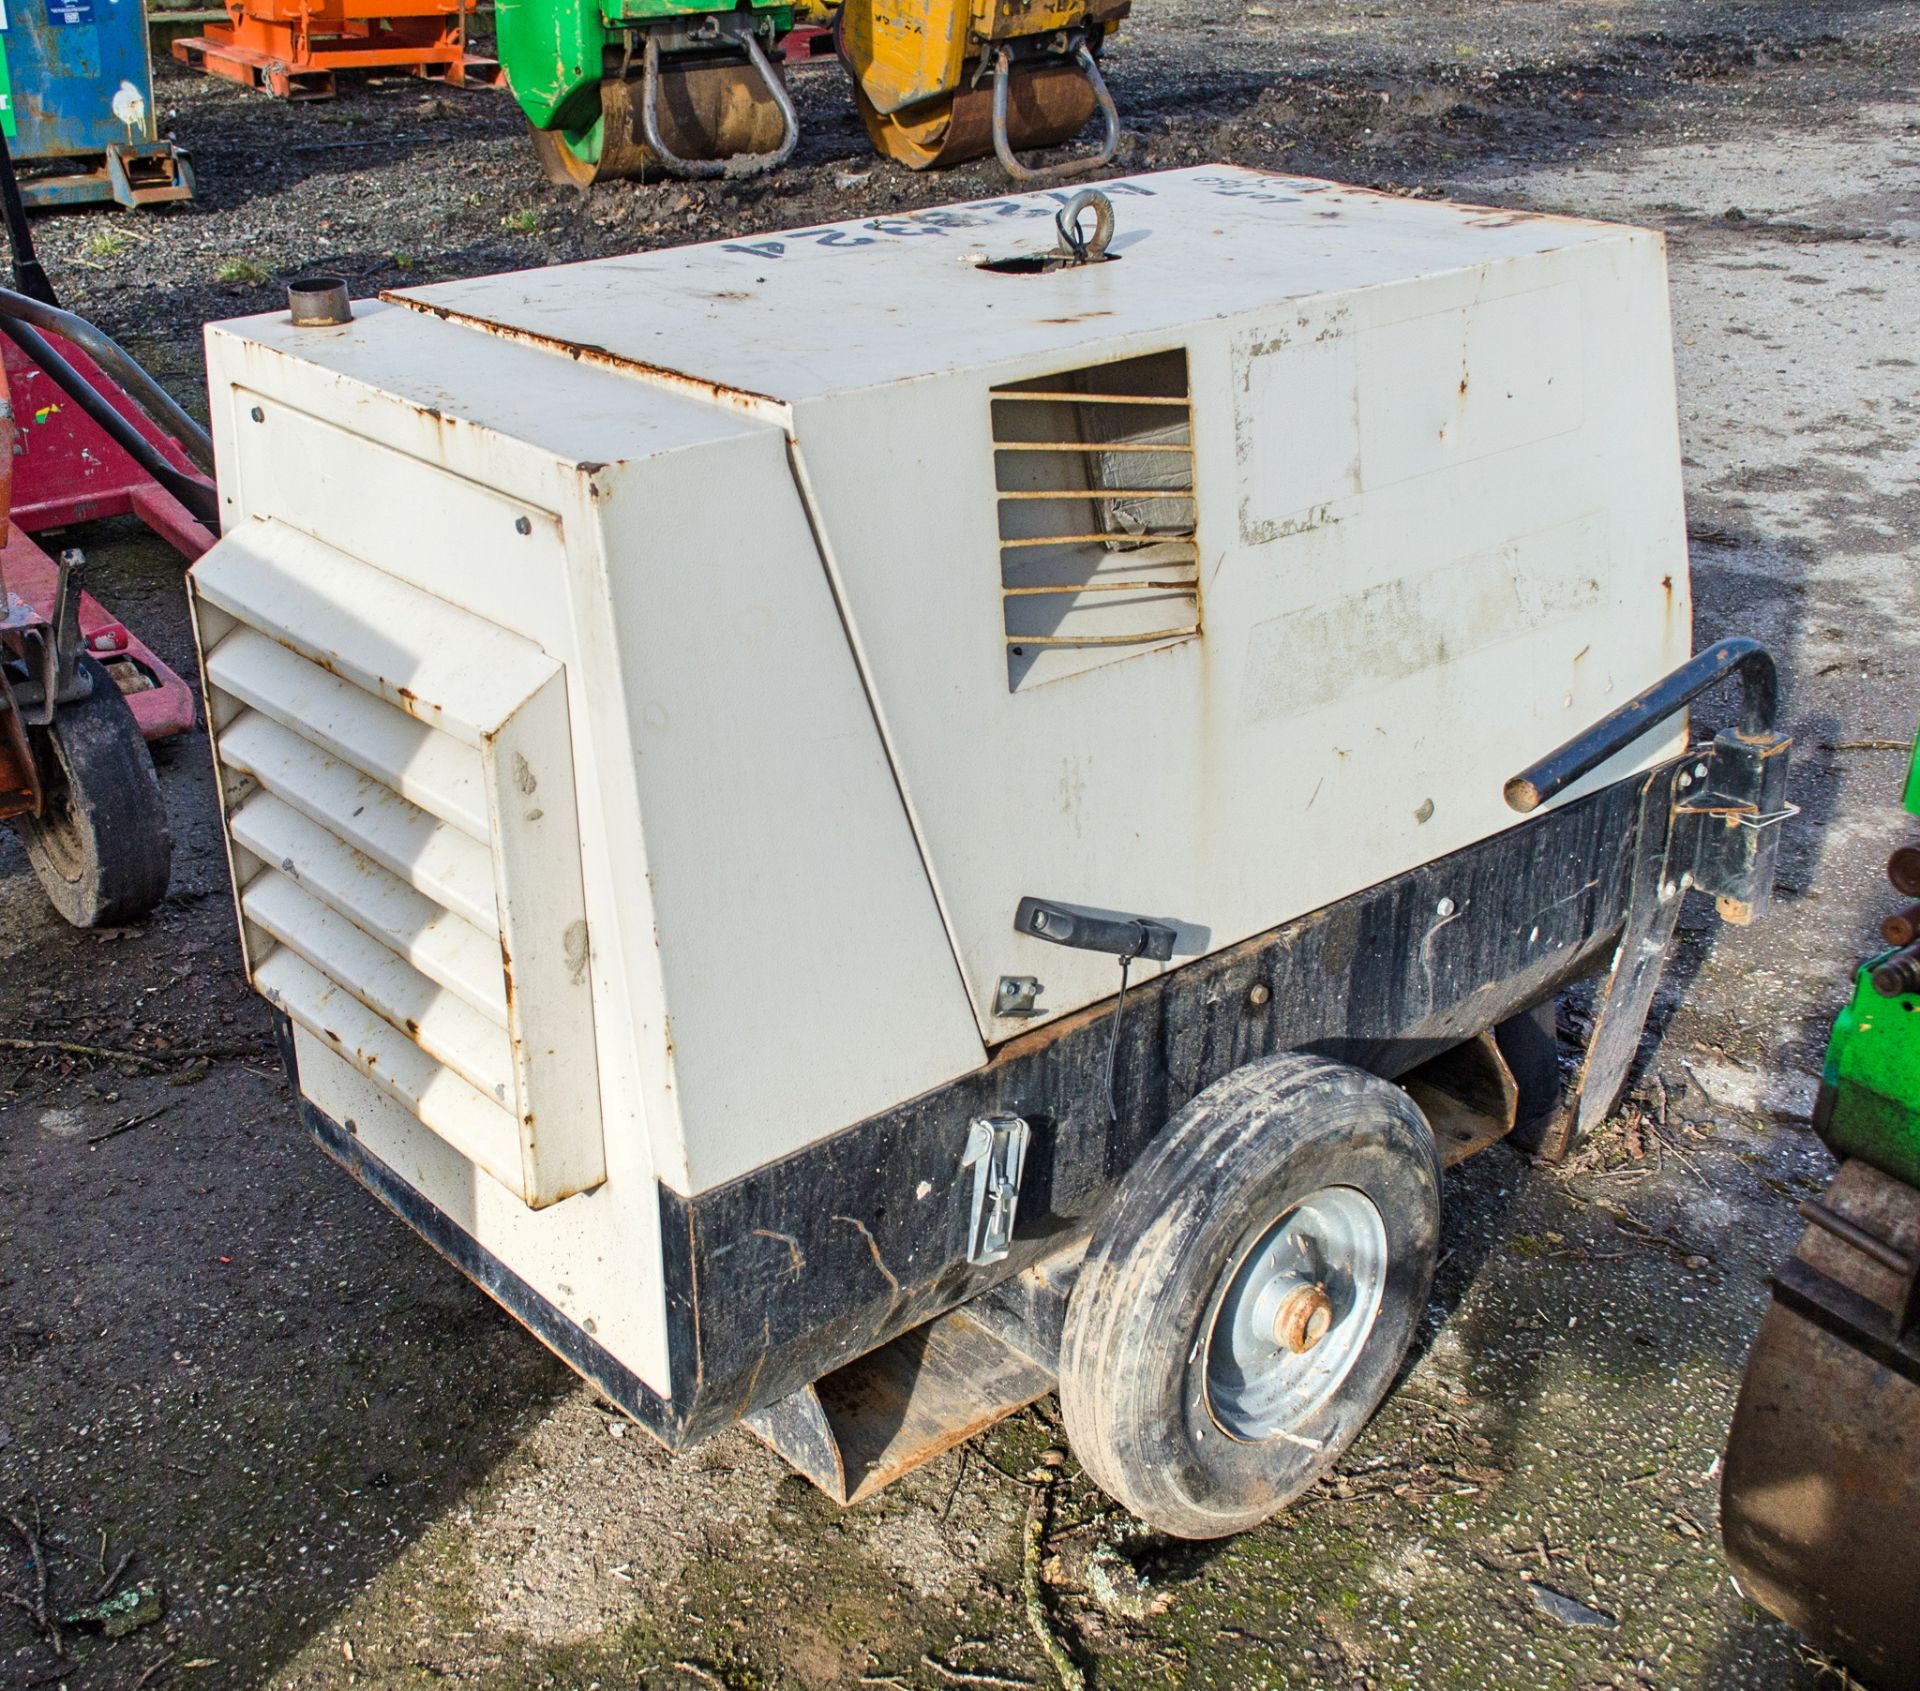 MHM MG6000 SSK-Y 6 kva diesel driven generator S/N: 229150134 Recorded hours: 4519 A723324 - Image 2 of 5